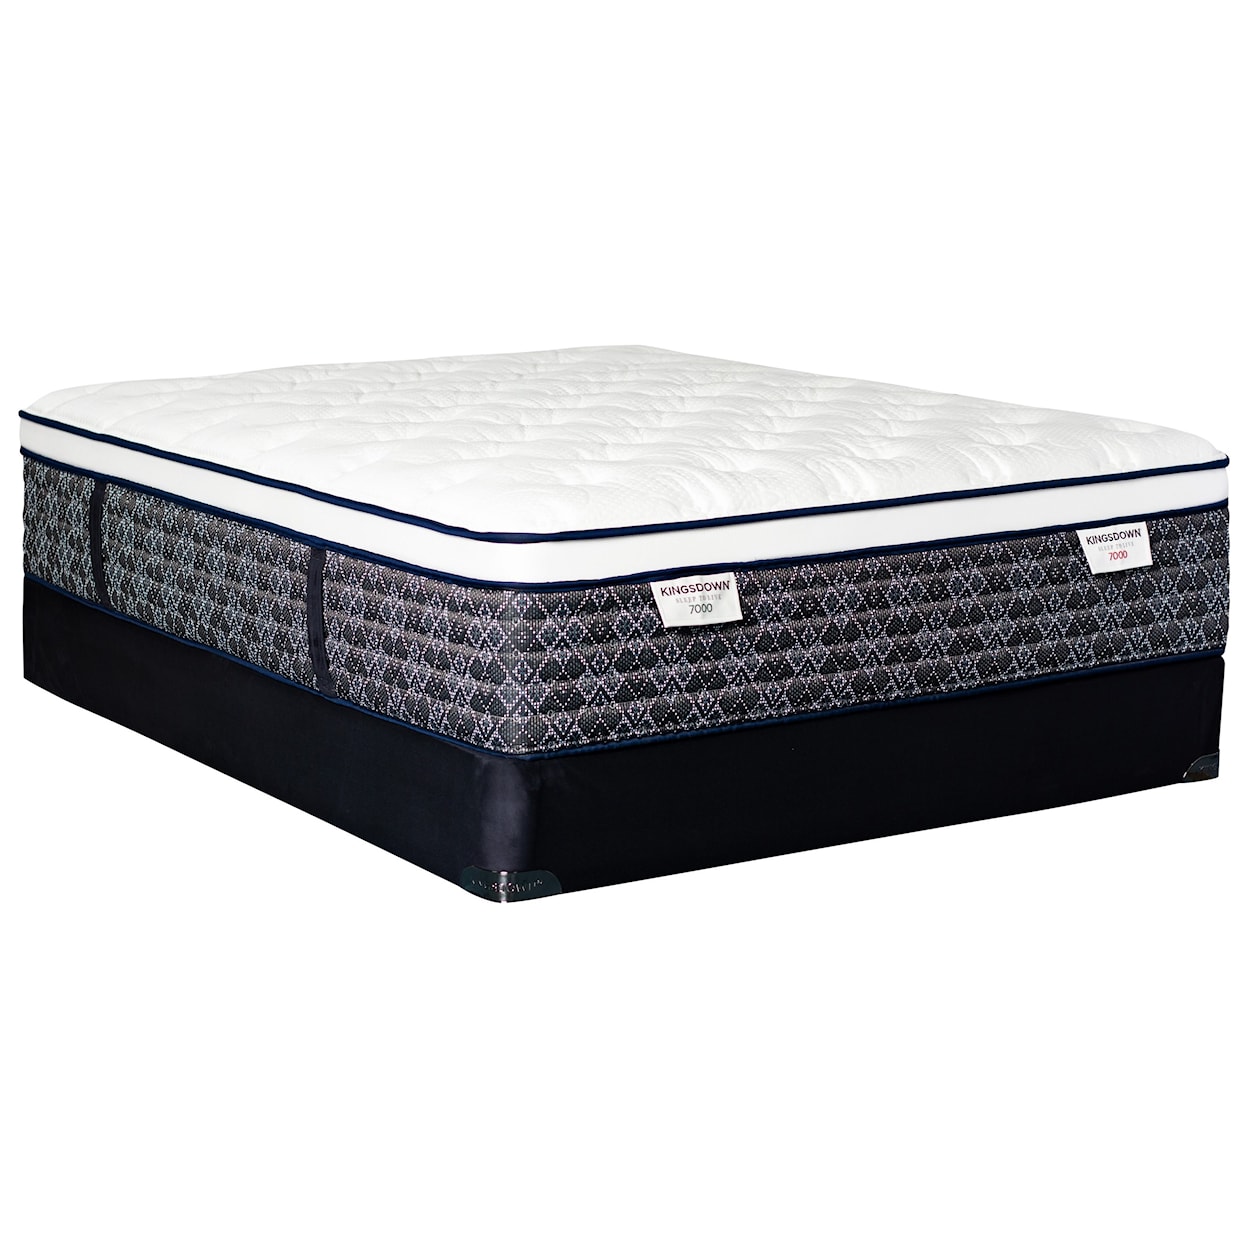 Kingsdown Sleep to Live 9000 Gold Blue ET Twin Pocketed Coil Mattress Set